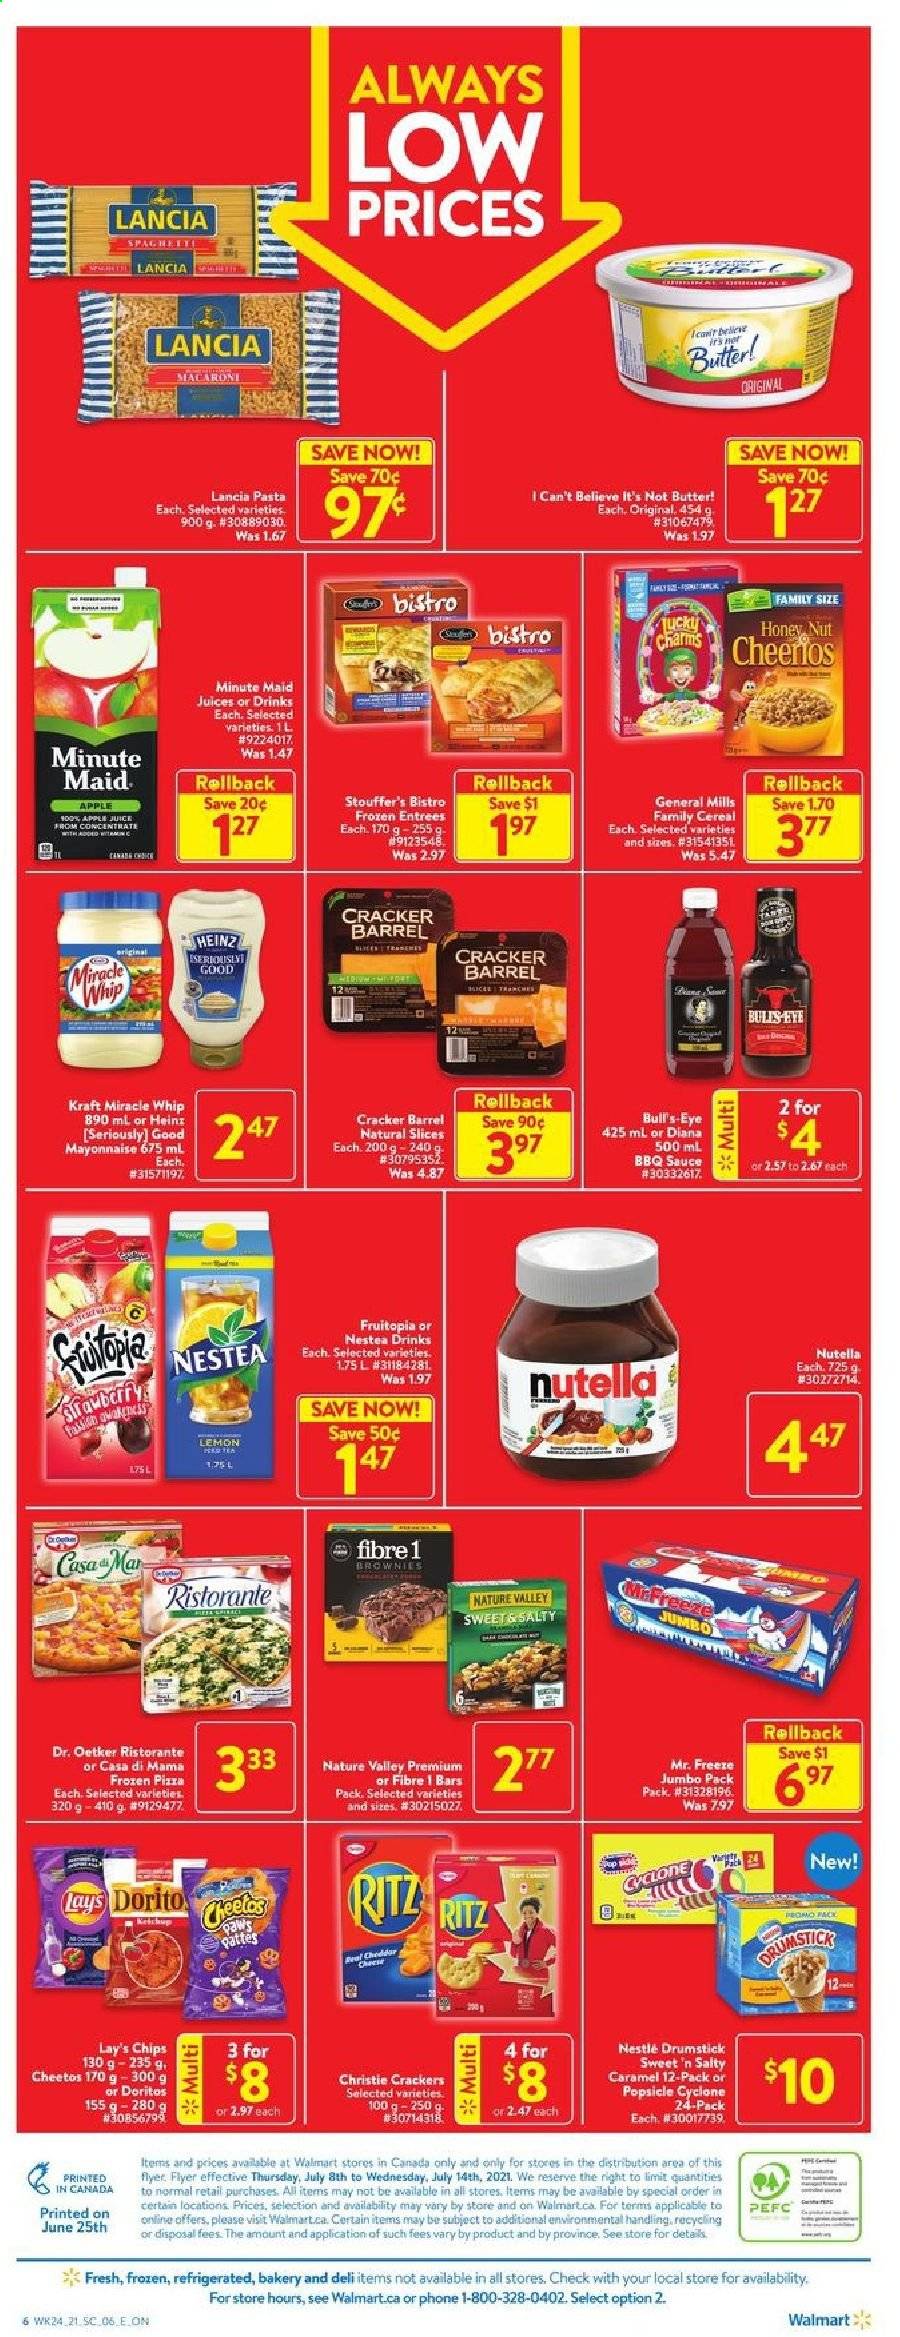 thumbnail - Walmart Flyer - July 08, 2021 - July 14, 2021 - Sales products - brownies, pizza, pasta, sauce, Kraft®, Dr. Oetker, butter, I Can't Believe It's Not Butter, mayonnaise, Miracle Whip, Stouffer's, crackers, RITZ, Doritos, Cheetos, Lay’s, Heinz, cereals, Nature Valley, BBQ sauce, caramel, apple juice, juice, fruit punch, Paws, Nestlé, Nutella. Page 3.